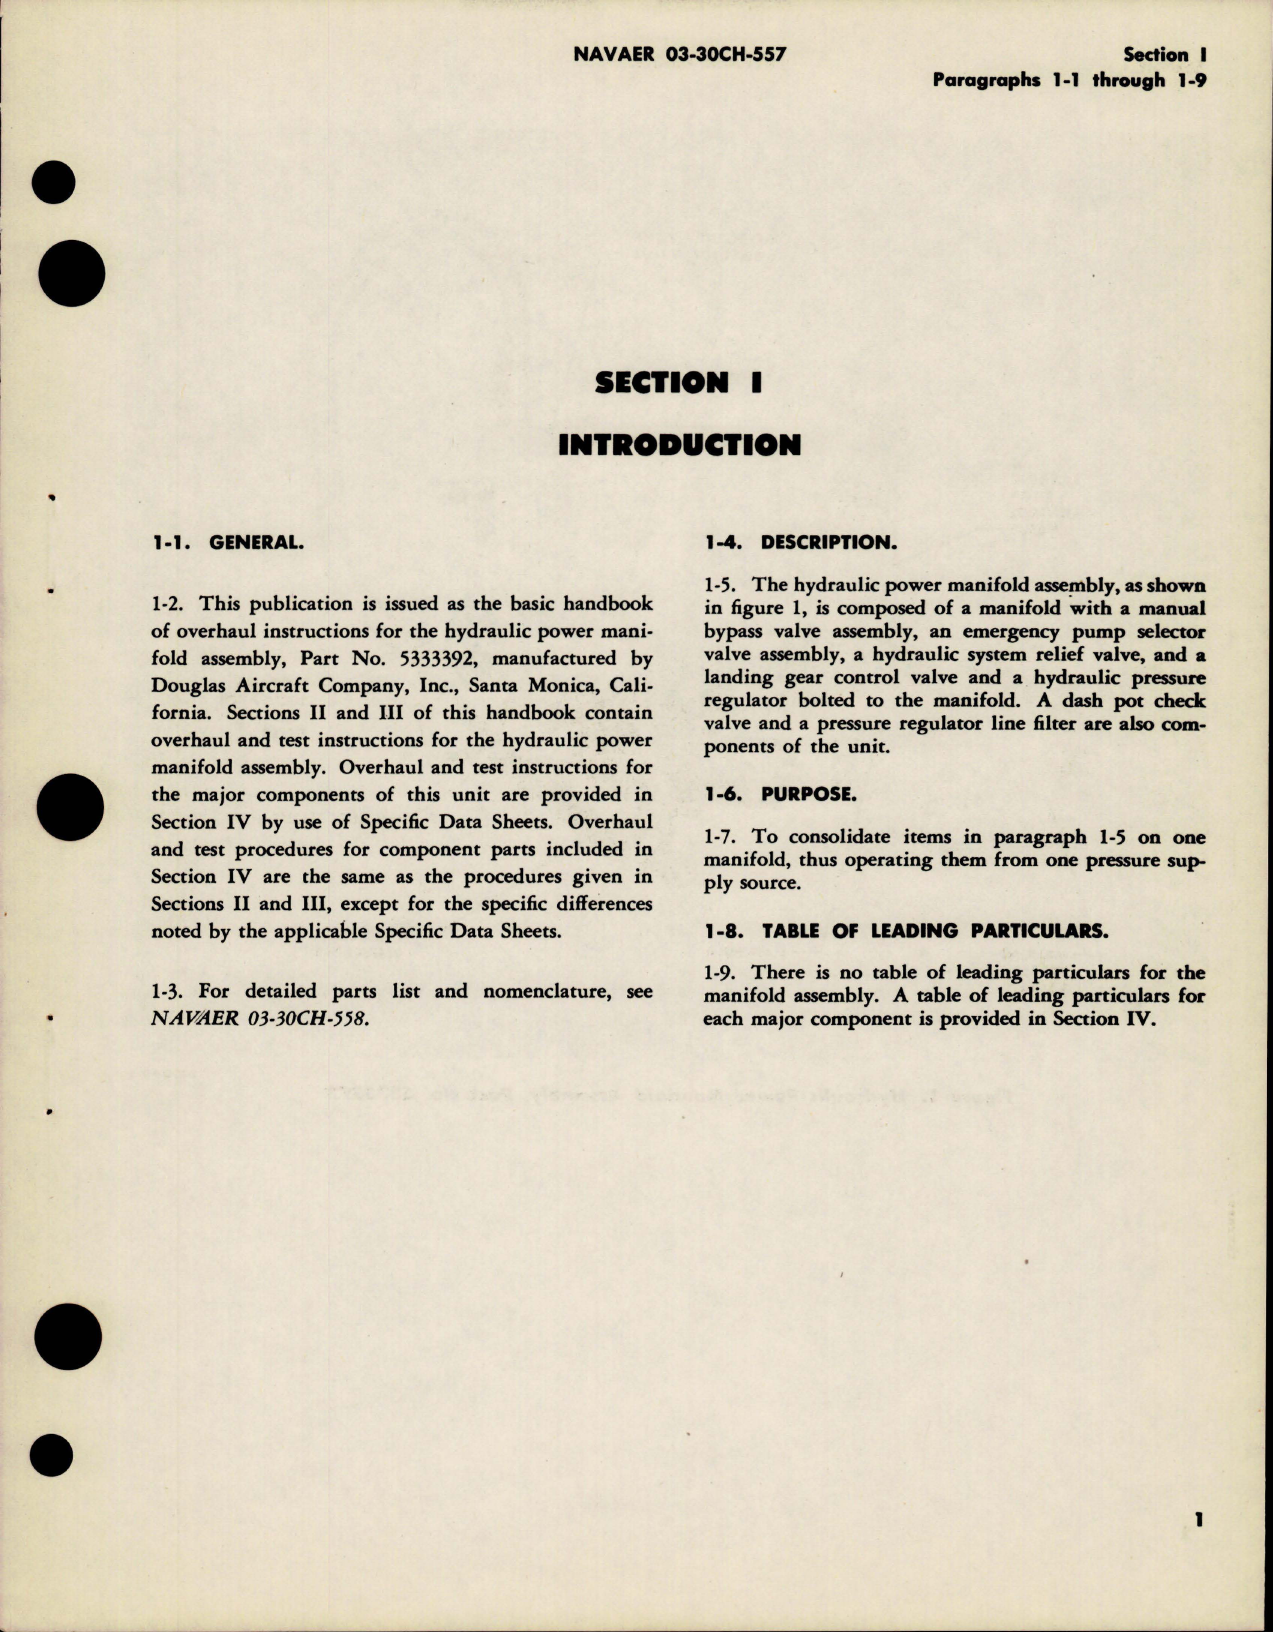 Sample page 5 from AirCorps Library document: Overhaul Instructions for Hydraulic Power Manifold Assembly - Part 5333392 